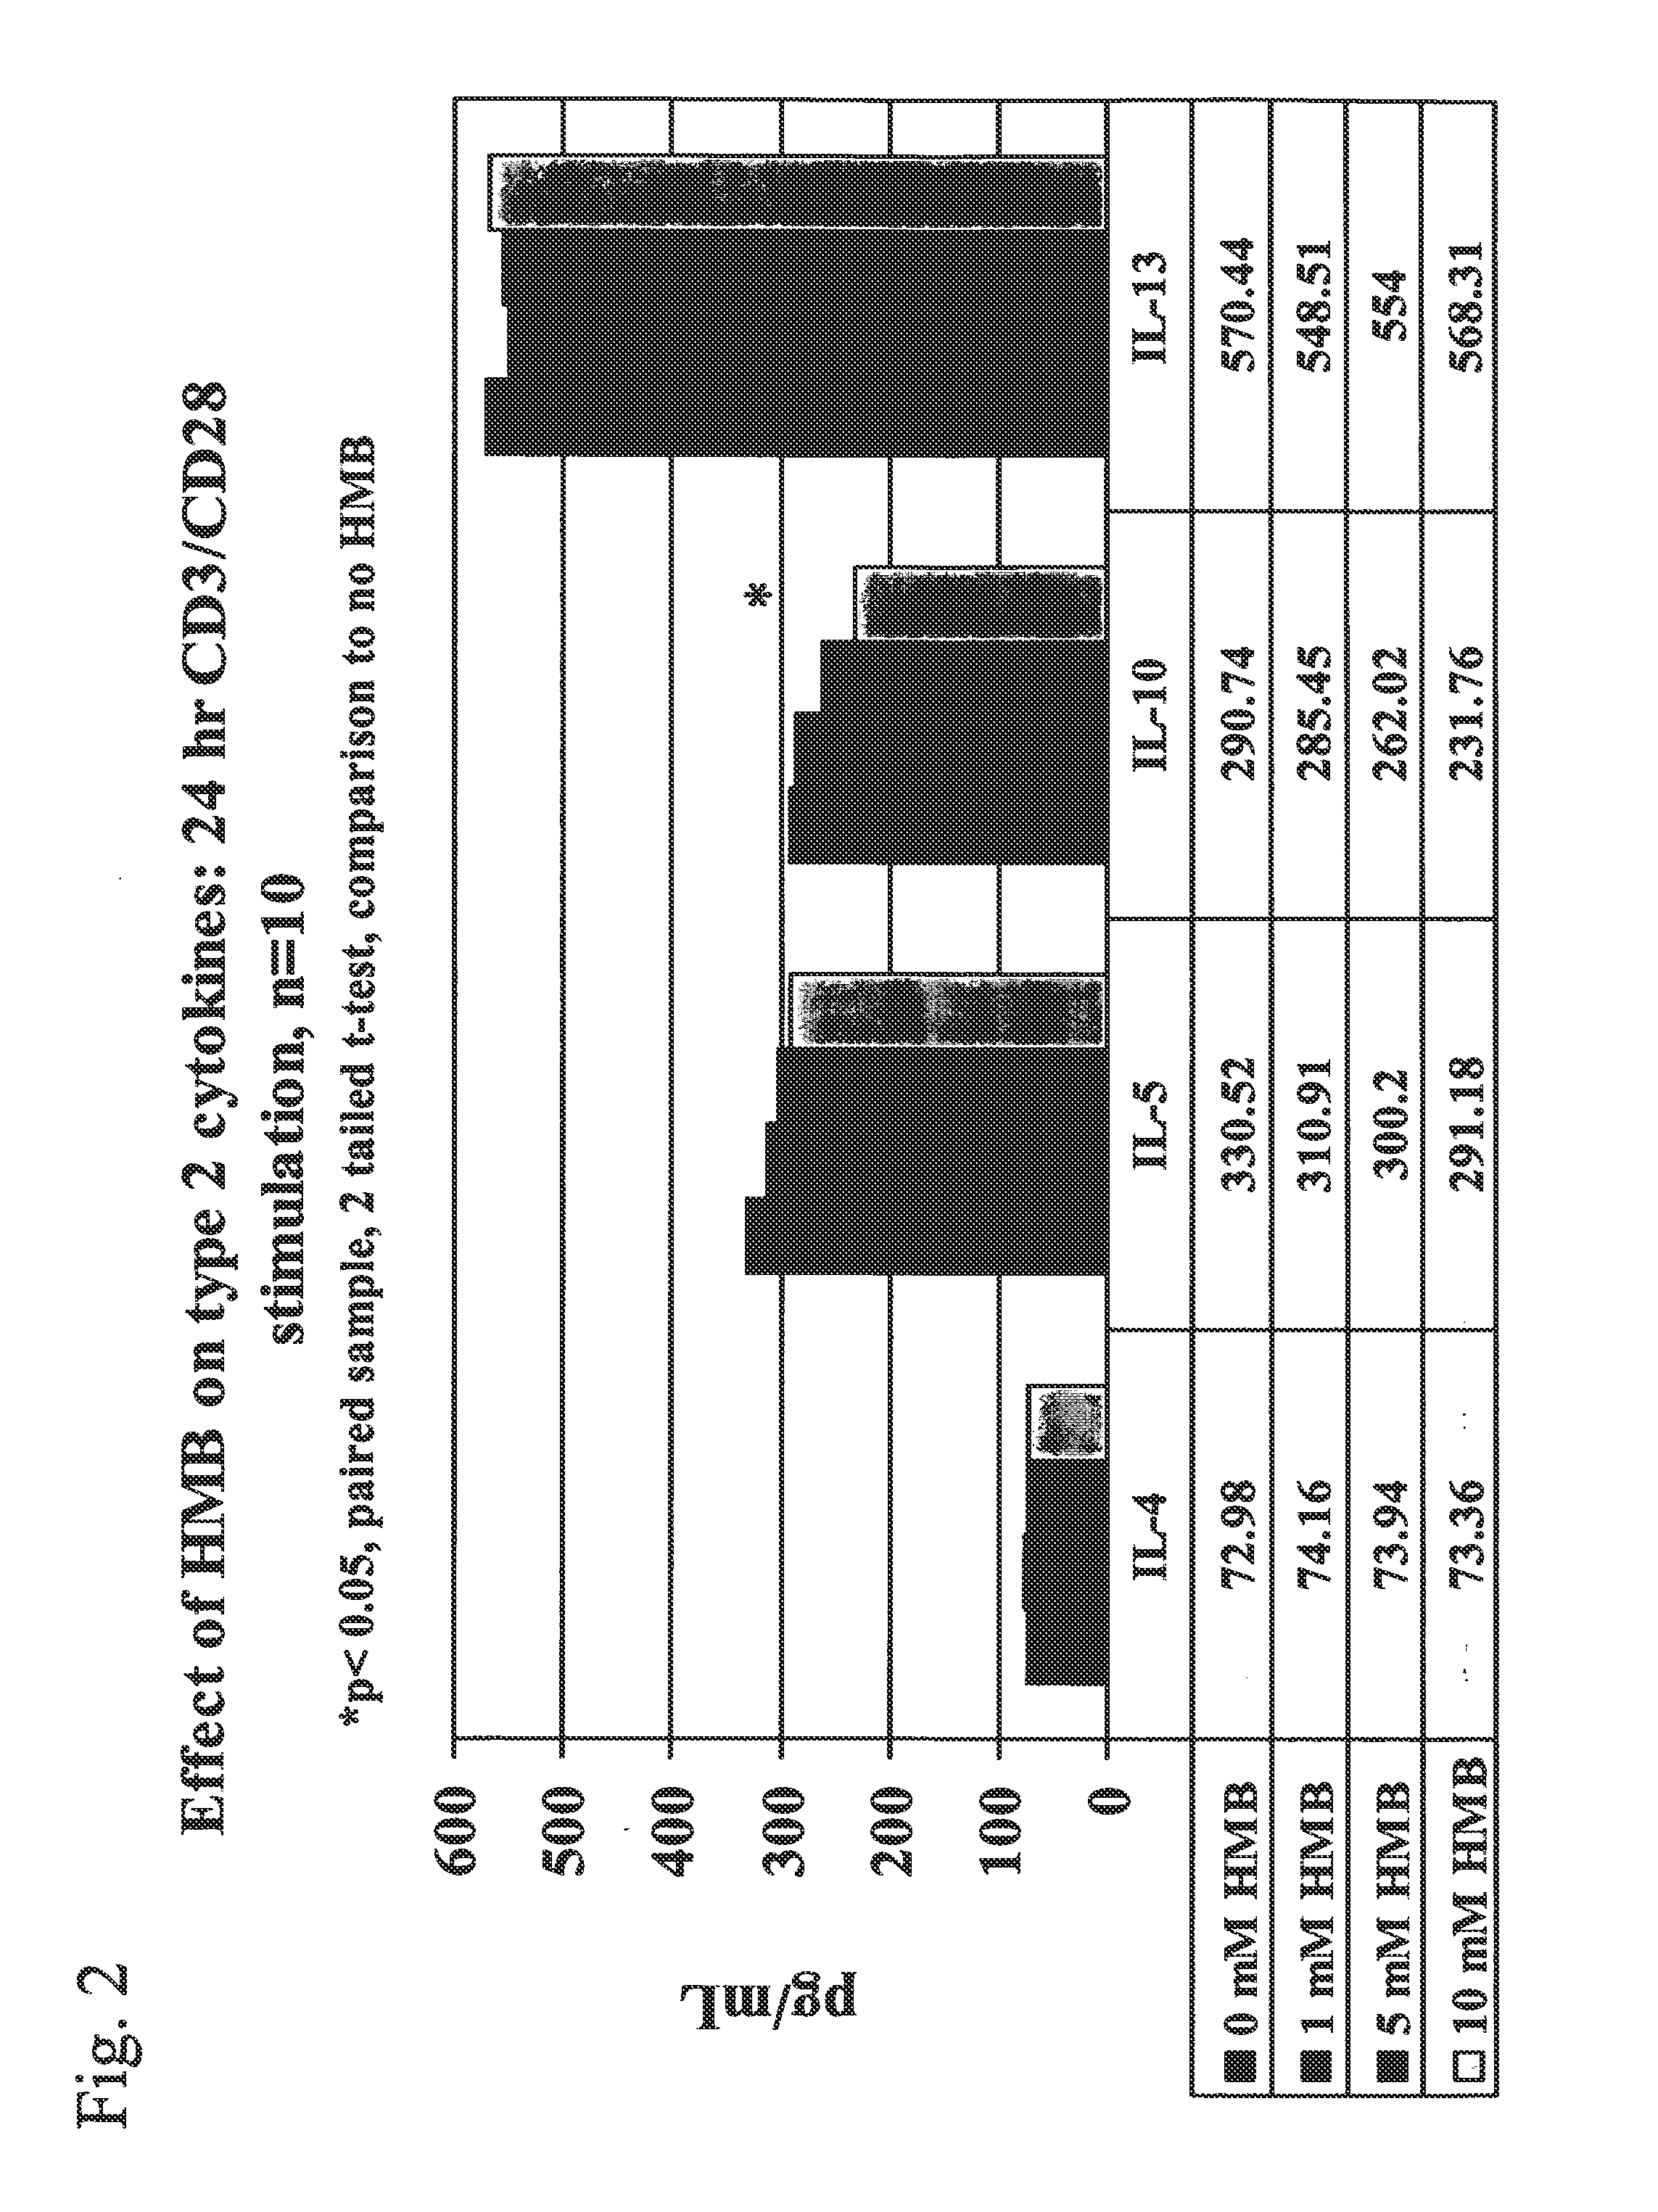 Method of using beta-hydroxy-beta-methylbutyrate for the treatment of cancer